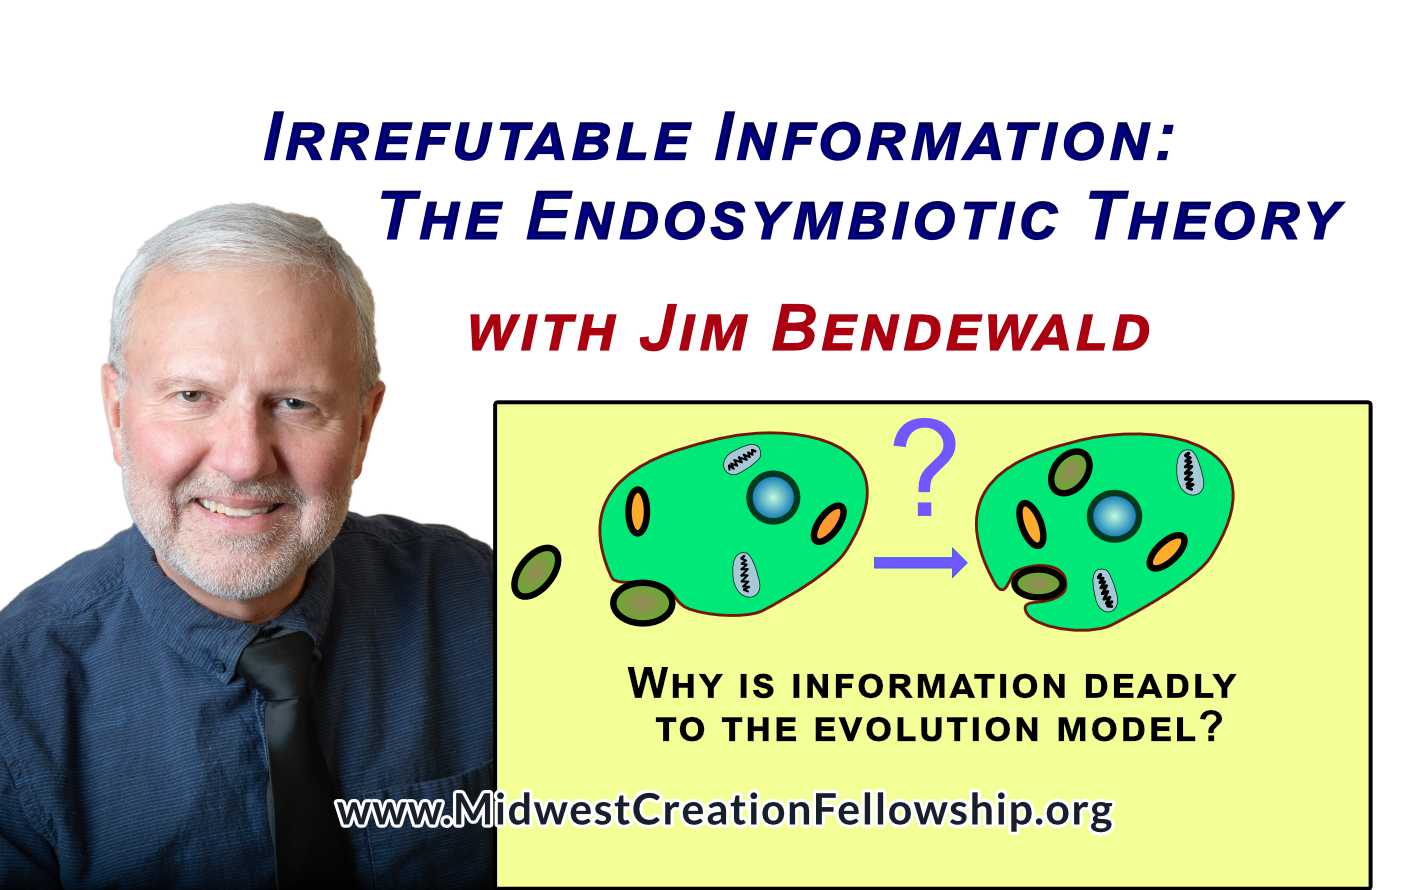 Title: Irrefutable Information: The Endosymbiotic Theory - Picture of Mr. Jim Bendewald. Click for his bio.